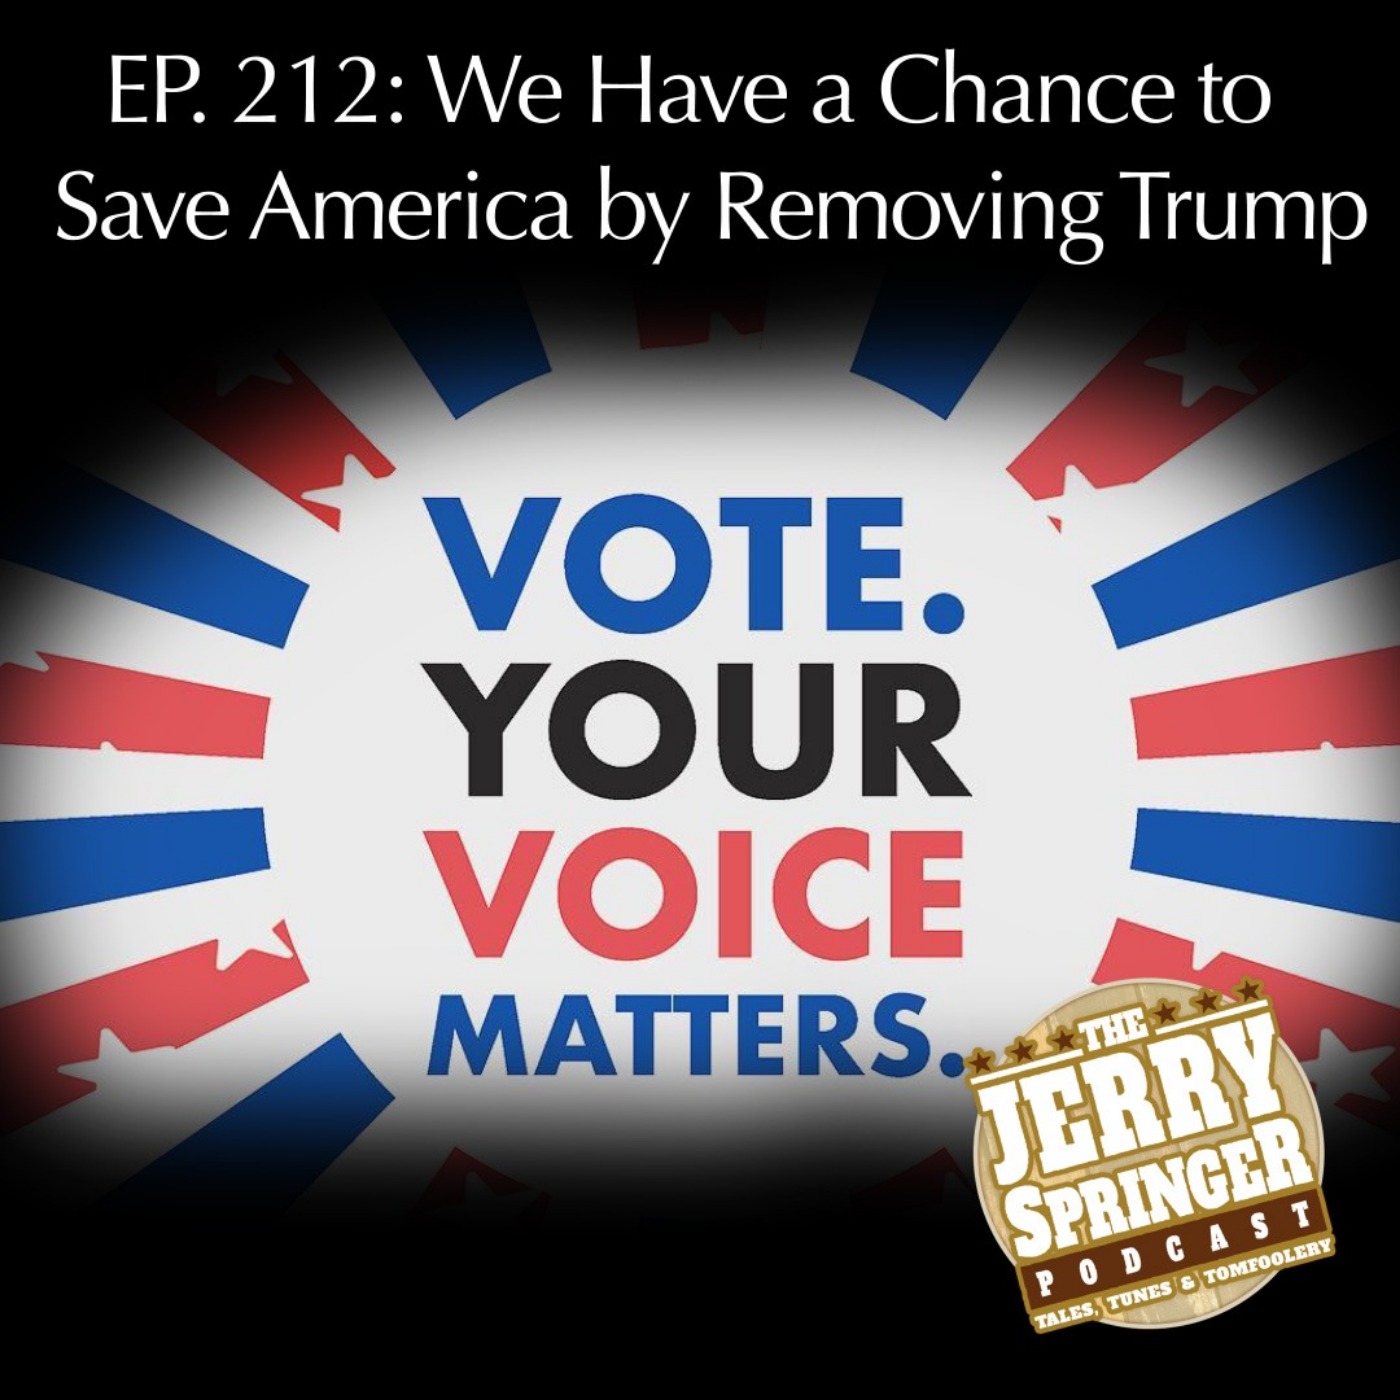 We Have a Chance to Save America by Removing Trump - EP. 212